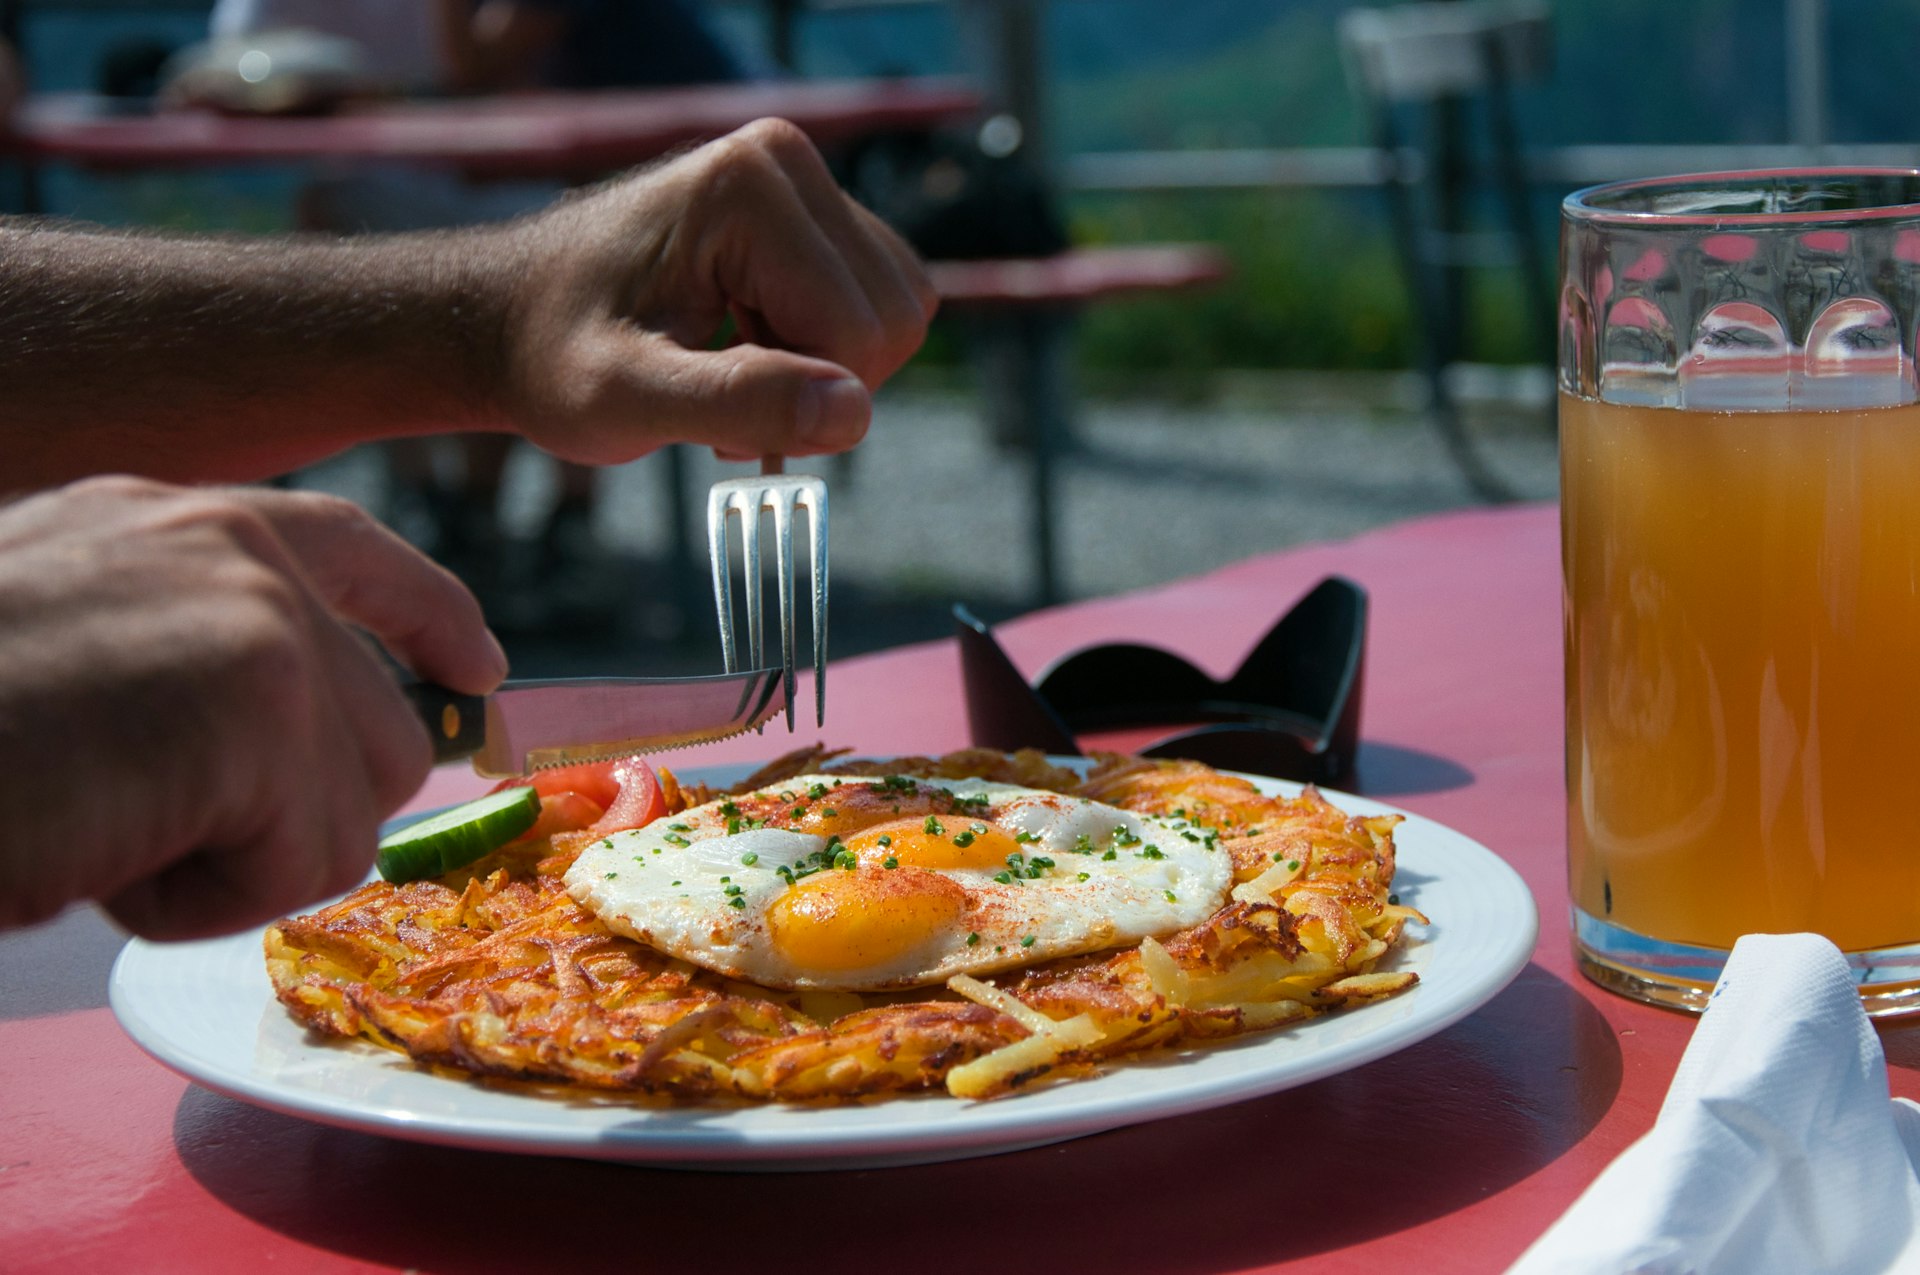 Man eating a rösti at a table in the sunshine